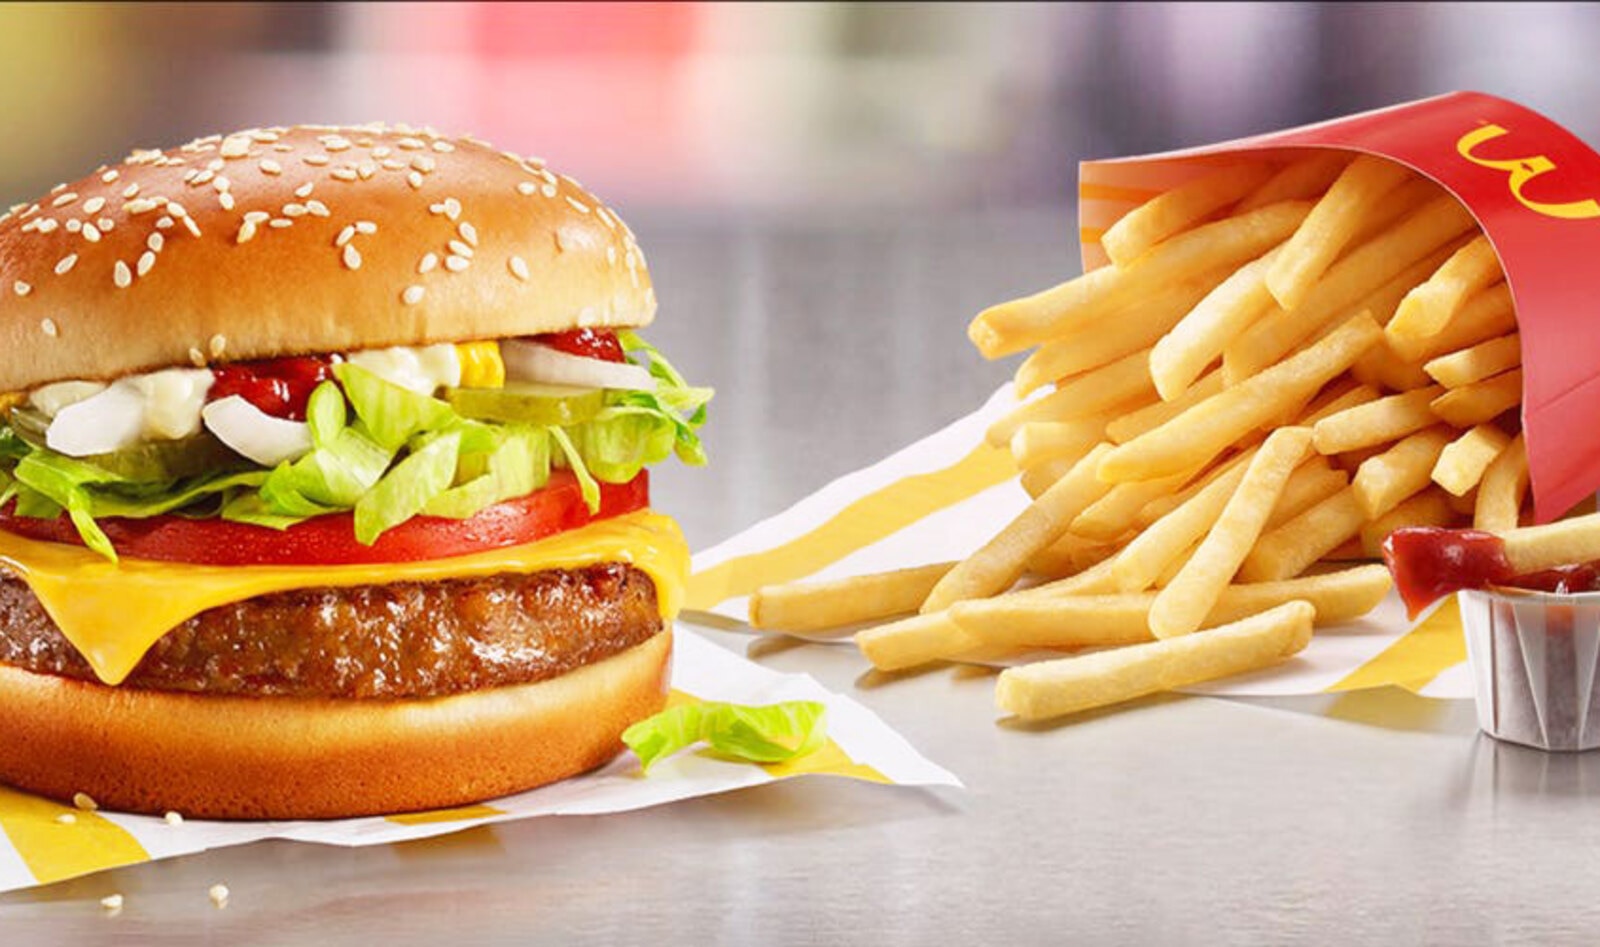 McDonald’s CEO: Vegan Options Are on the Way